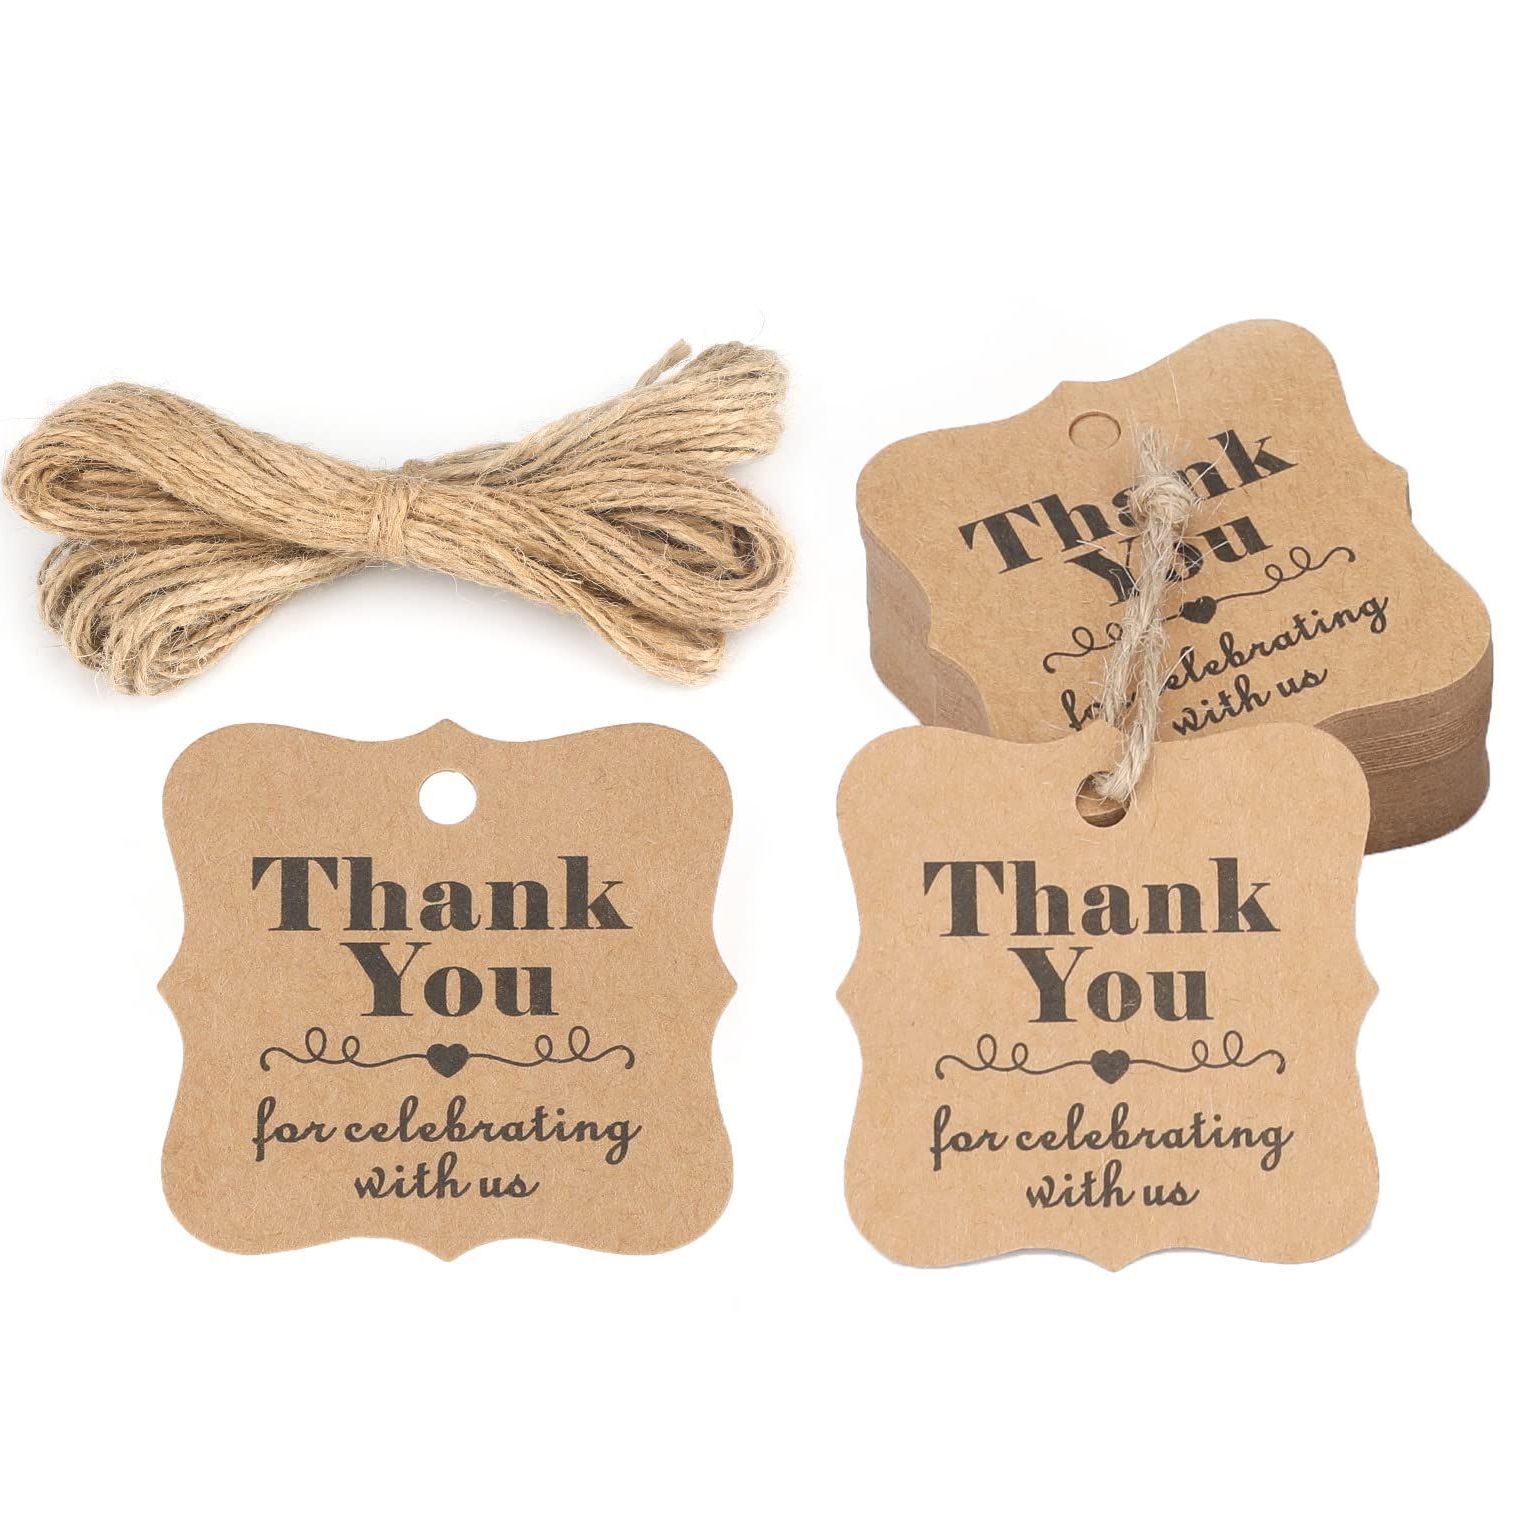 Kraft Paper Gift Tags With Jute Twine, 100 Pcs